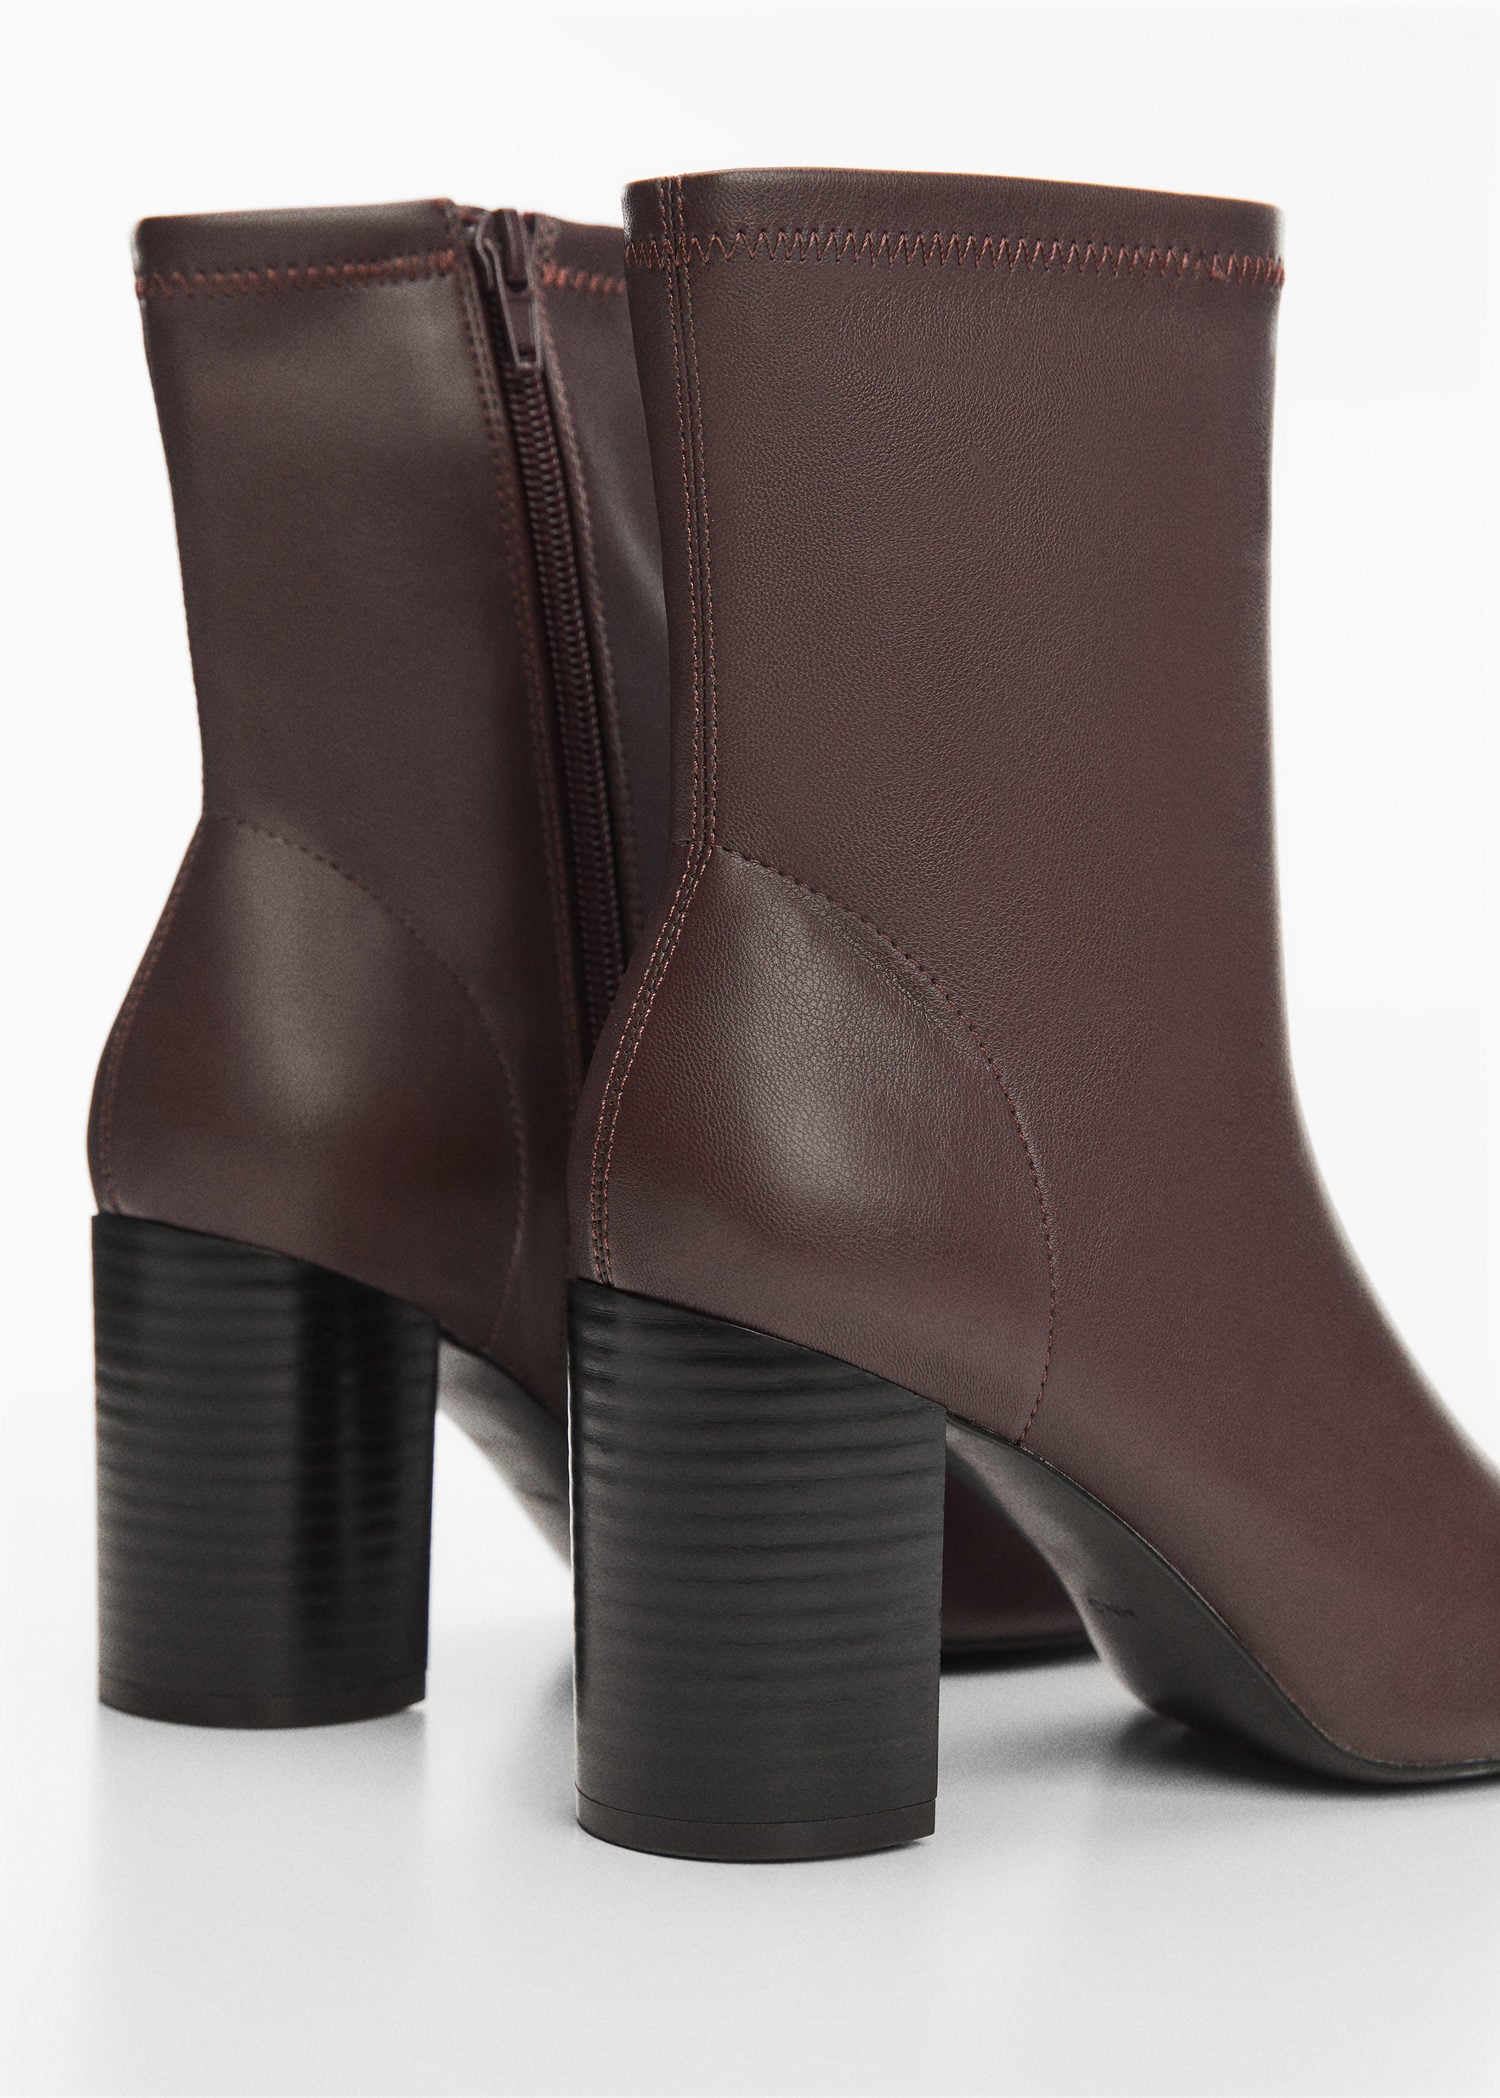 ARC in BROWN LEATHER Heeled Ankle Boots - OTBT shoes